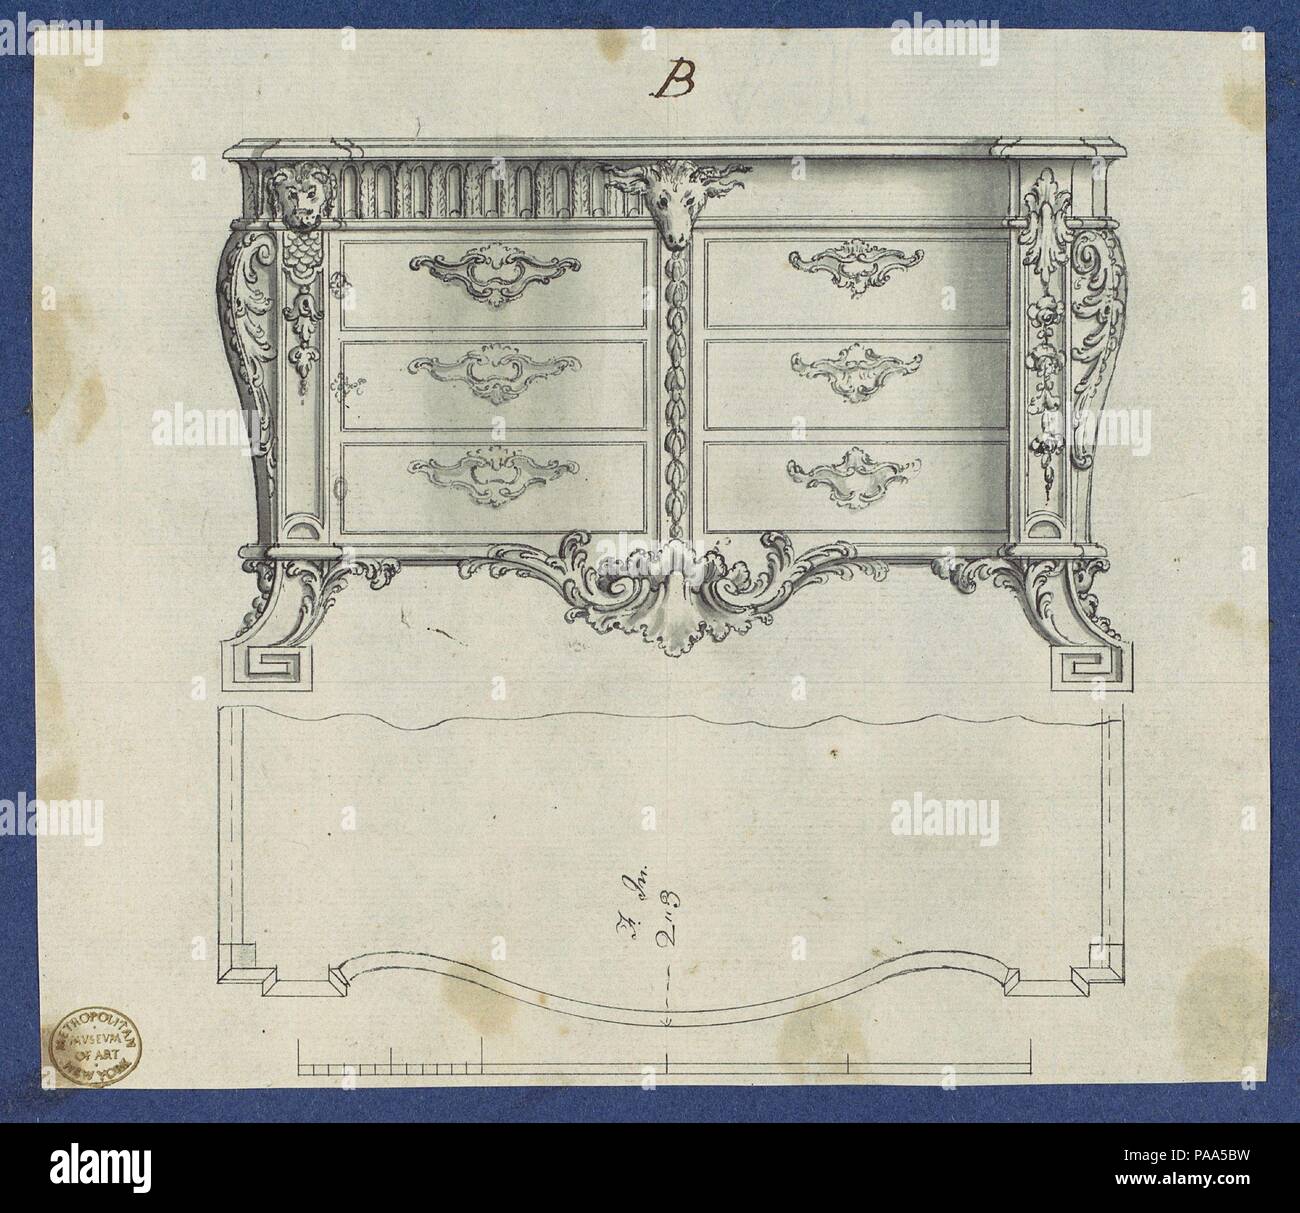 French Commode, from Chippendale Drawings, Vol. II. Artist: Thomas Chippendale (British, baptised Otley, West Yorkshire 1718-1779 London). Dimensions: sheet: 5 3/4 x 6 11/16 in. (14.6 x 17 cm). Published in: London. Date: 1762.  Preparatory drawing for Thomas Chippendale's 'Gentleman and Cabinet Maker's Director'. Published in reverse as the right half of plate LXVIII in the third edition of 1762. Museum: Metropolitan Museum of Art, New York, USA. Stock Photo